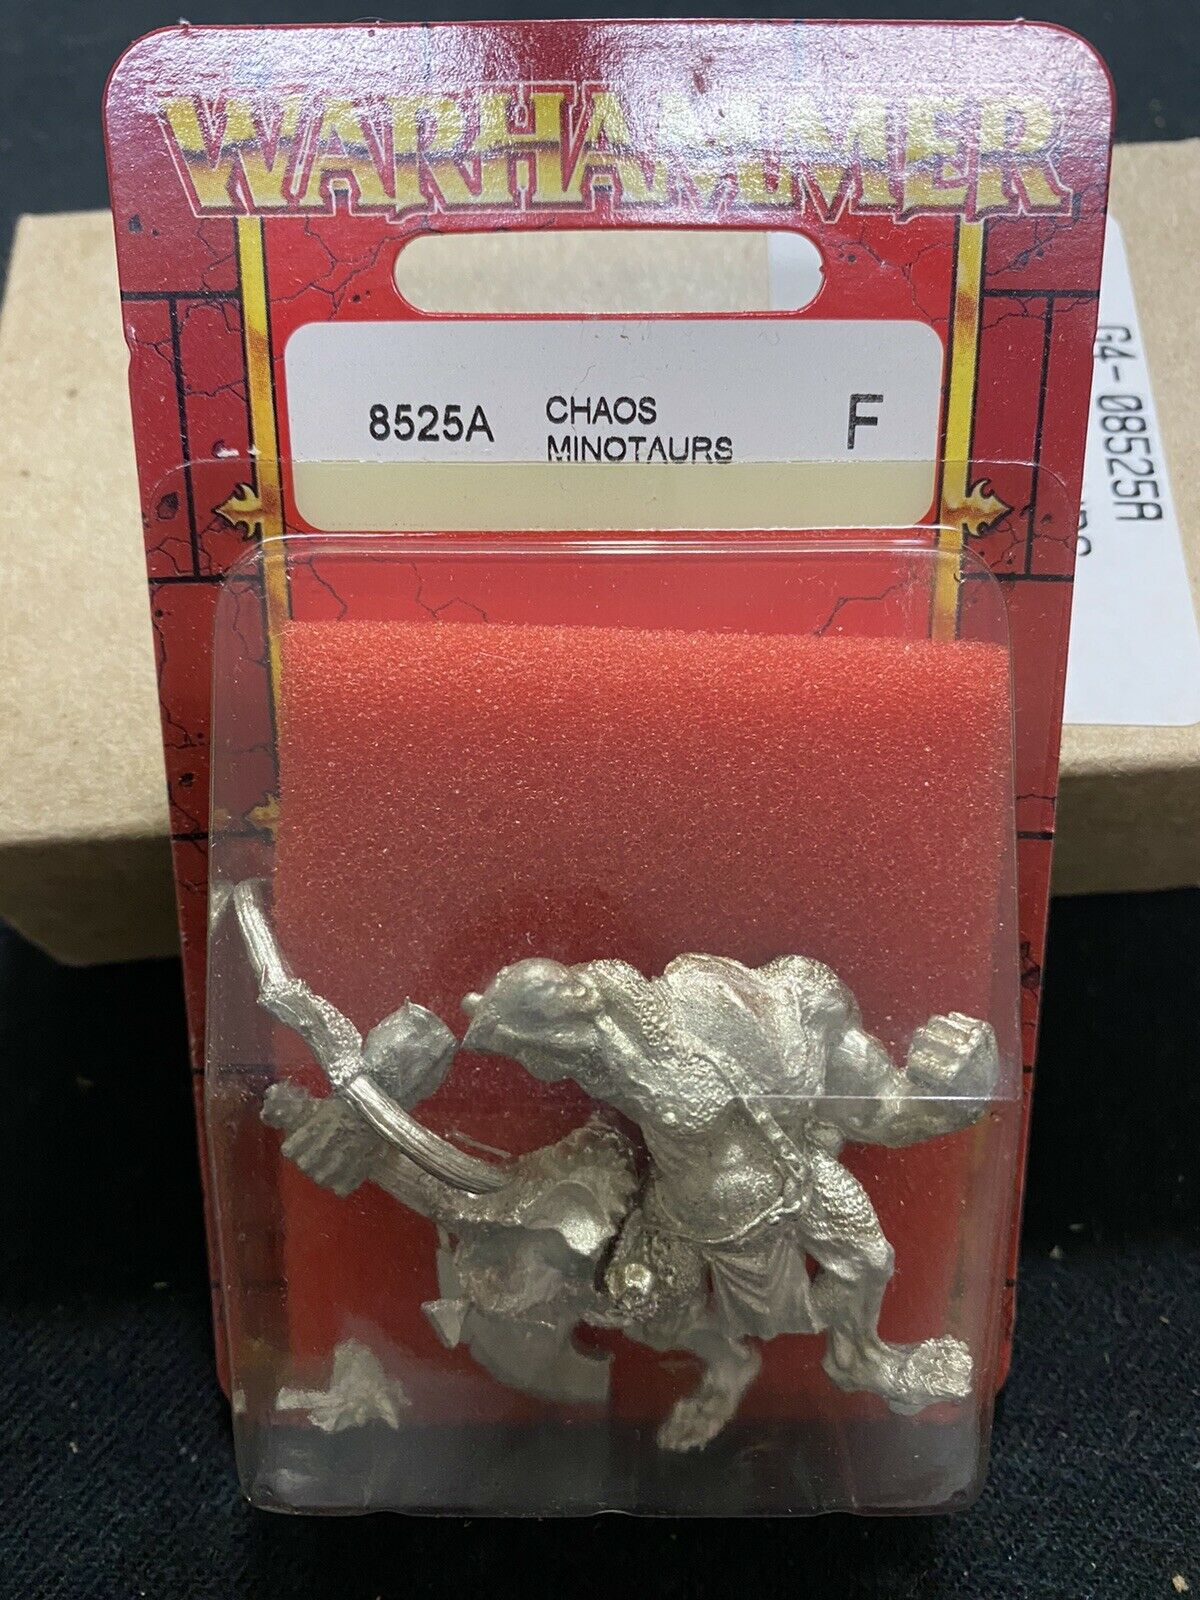 Warhammer Miniatures #8525a Chaos Minotaurs New Sealed